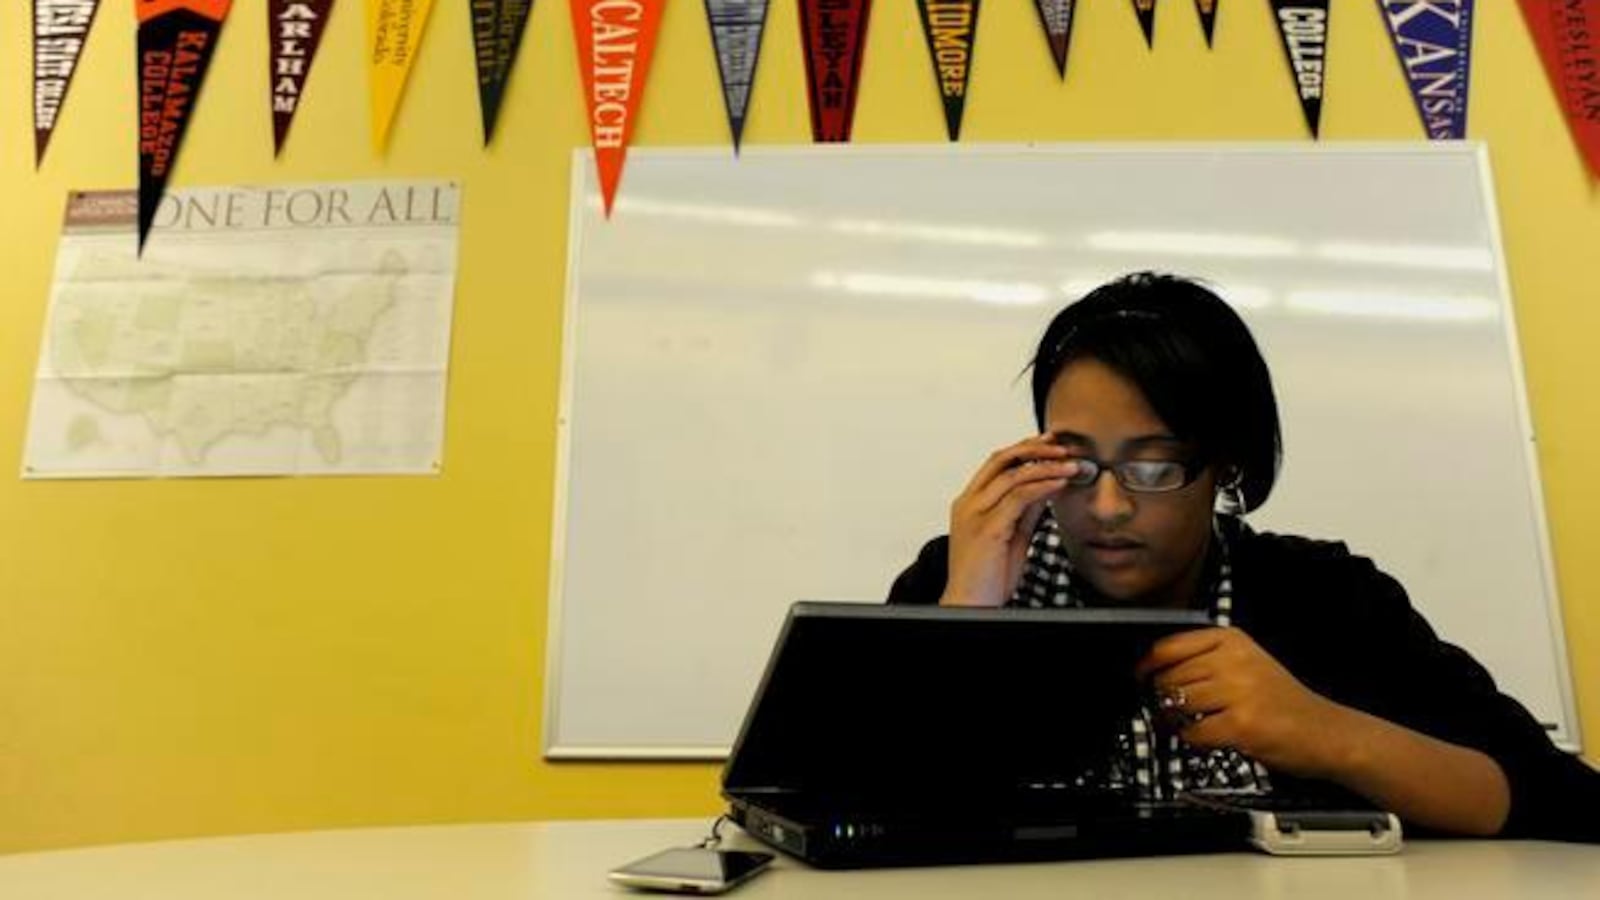 A DSST student works on homework during a study period in this 2010 photo.